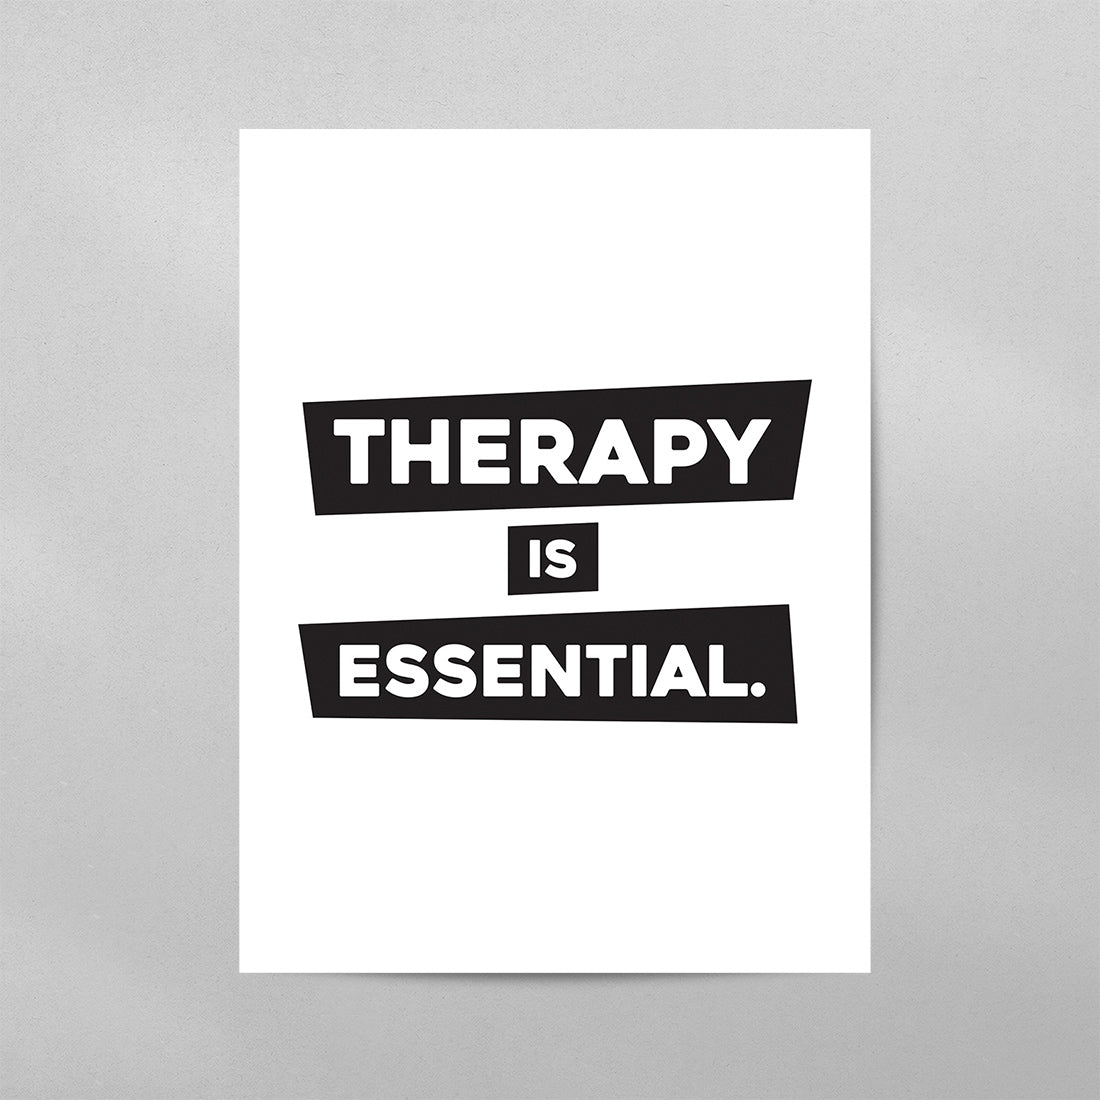 Therapy is Essential